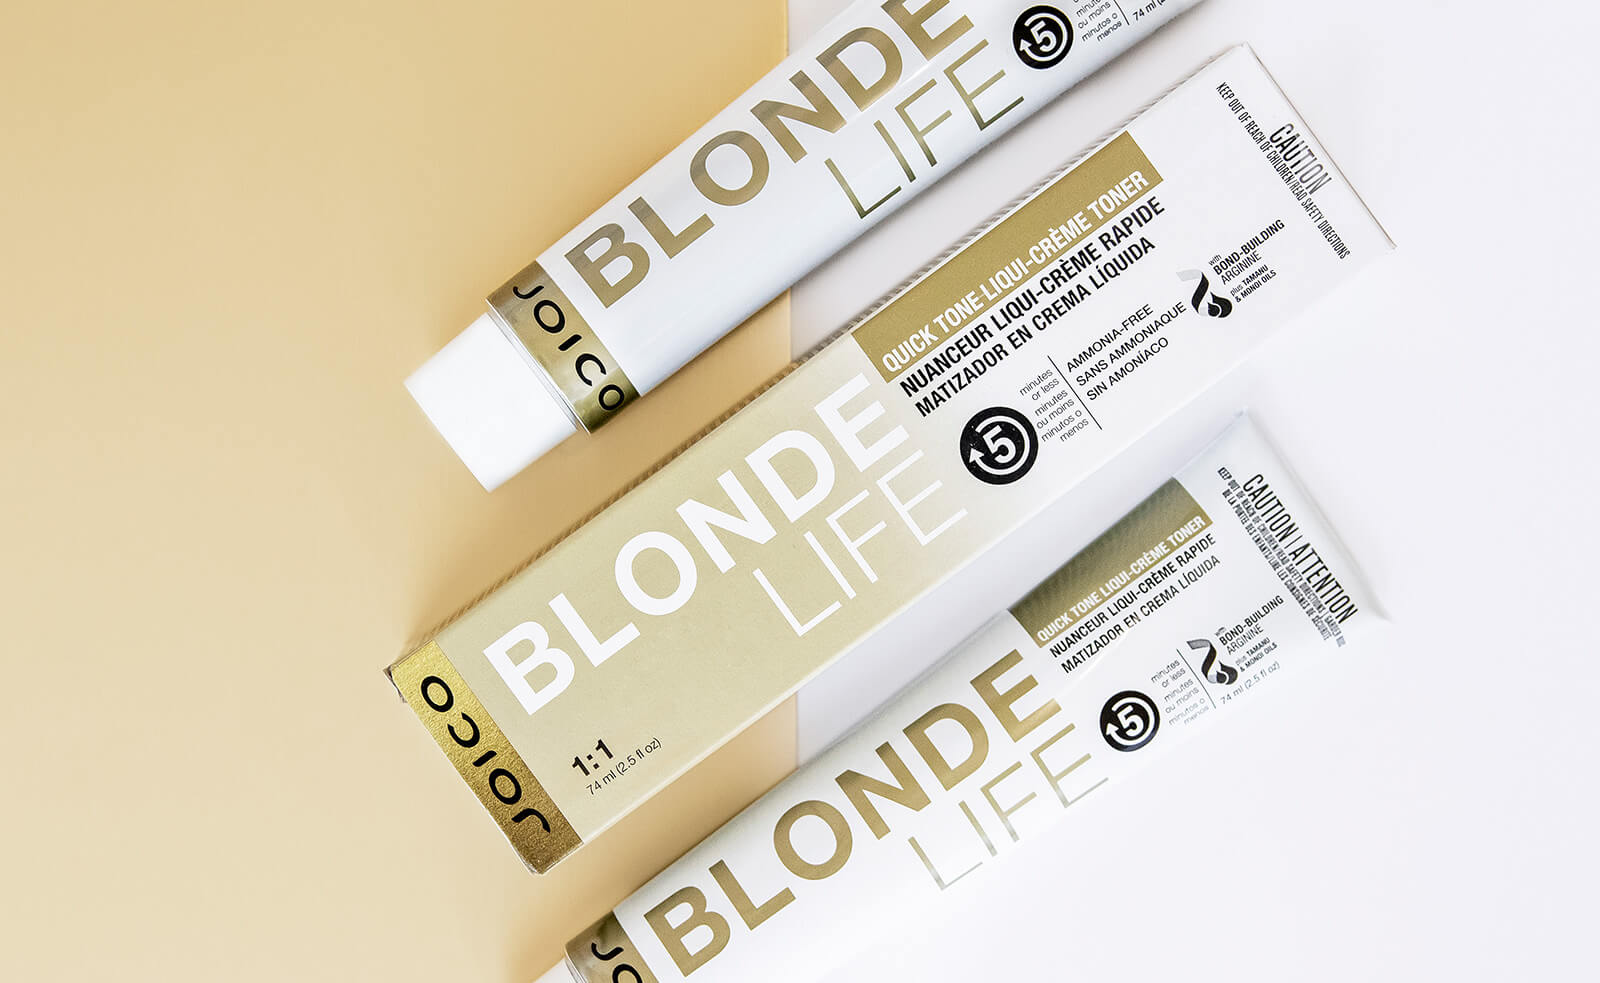 Blonde Life Quick-Tone Box and tubes